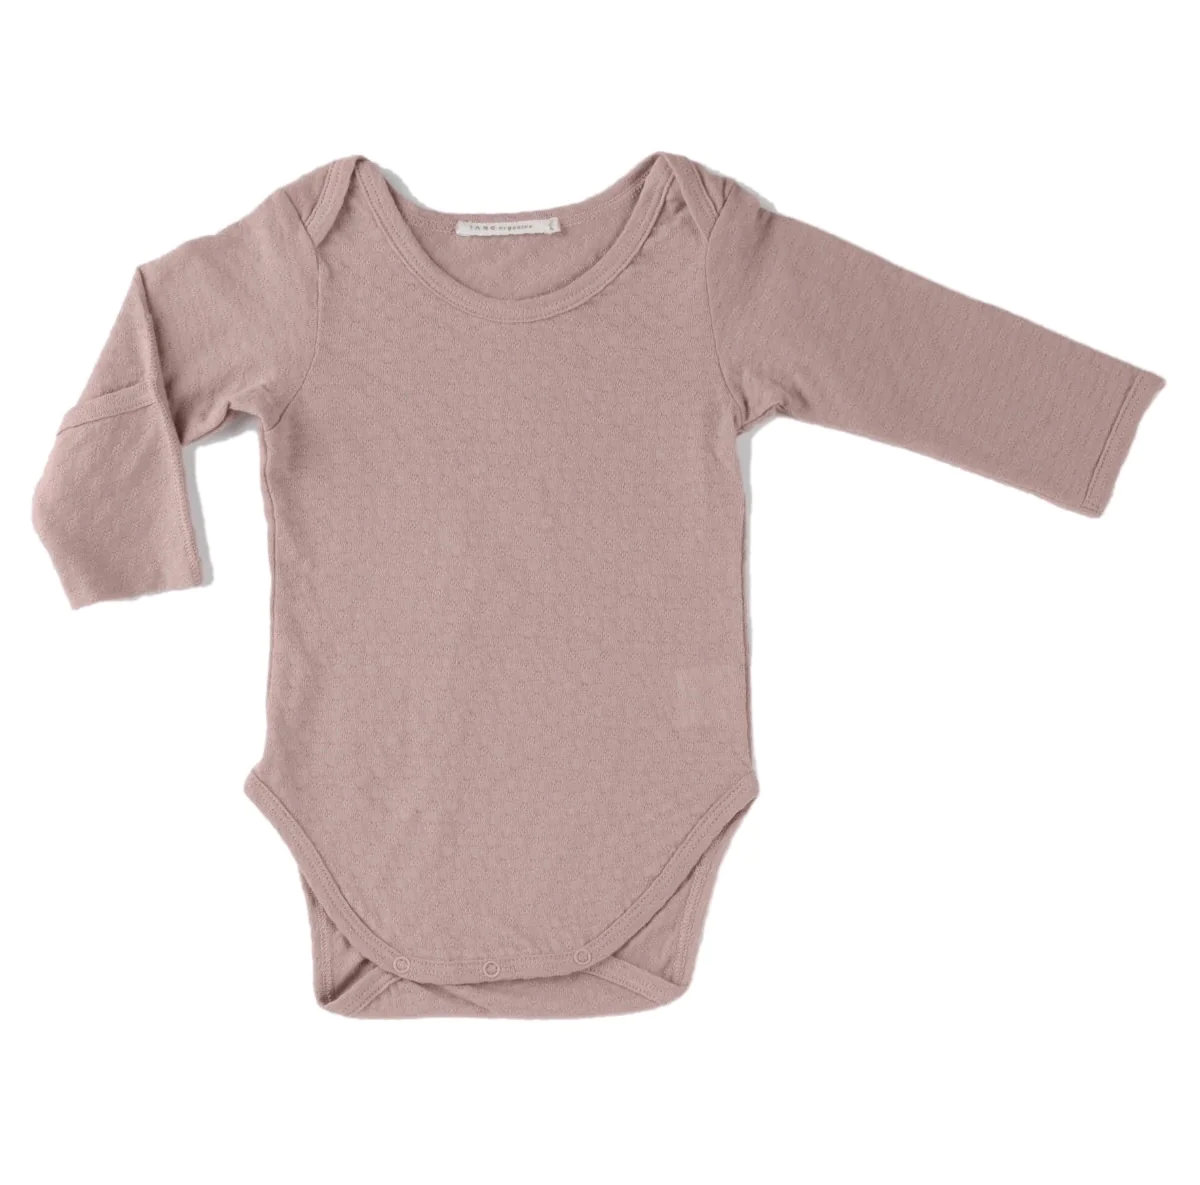 Pointelle Crewneck Bodysuit with Hand Covers by Tane, Dusk